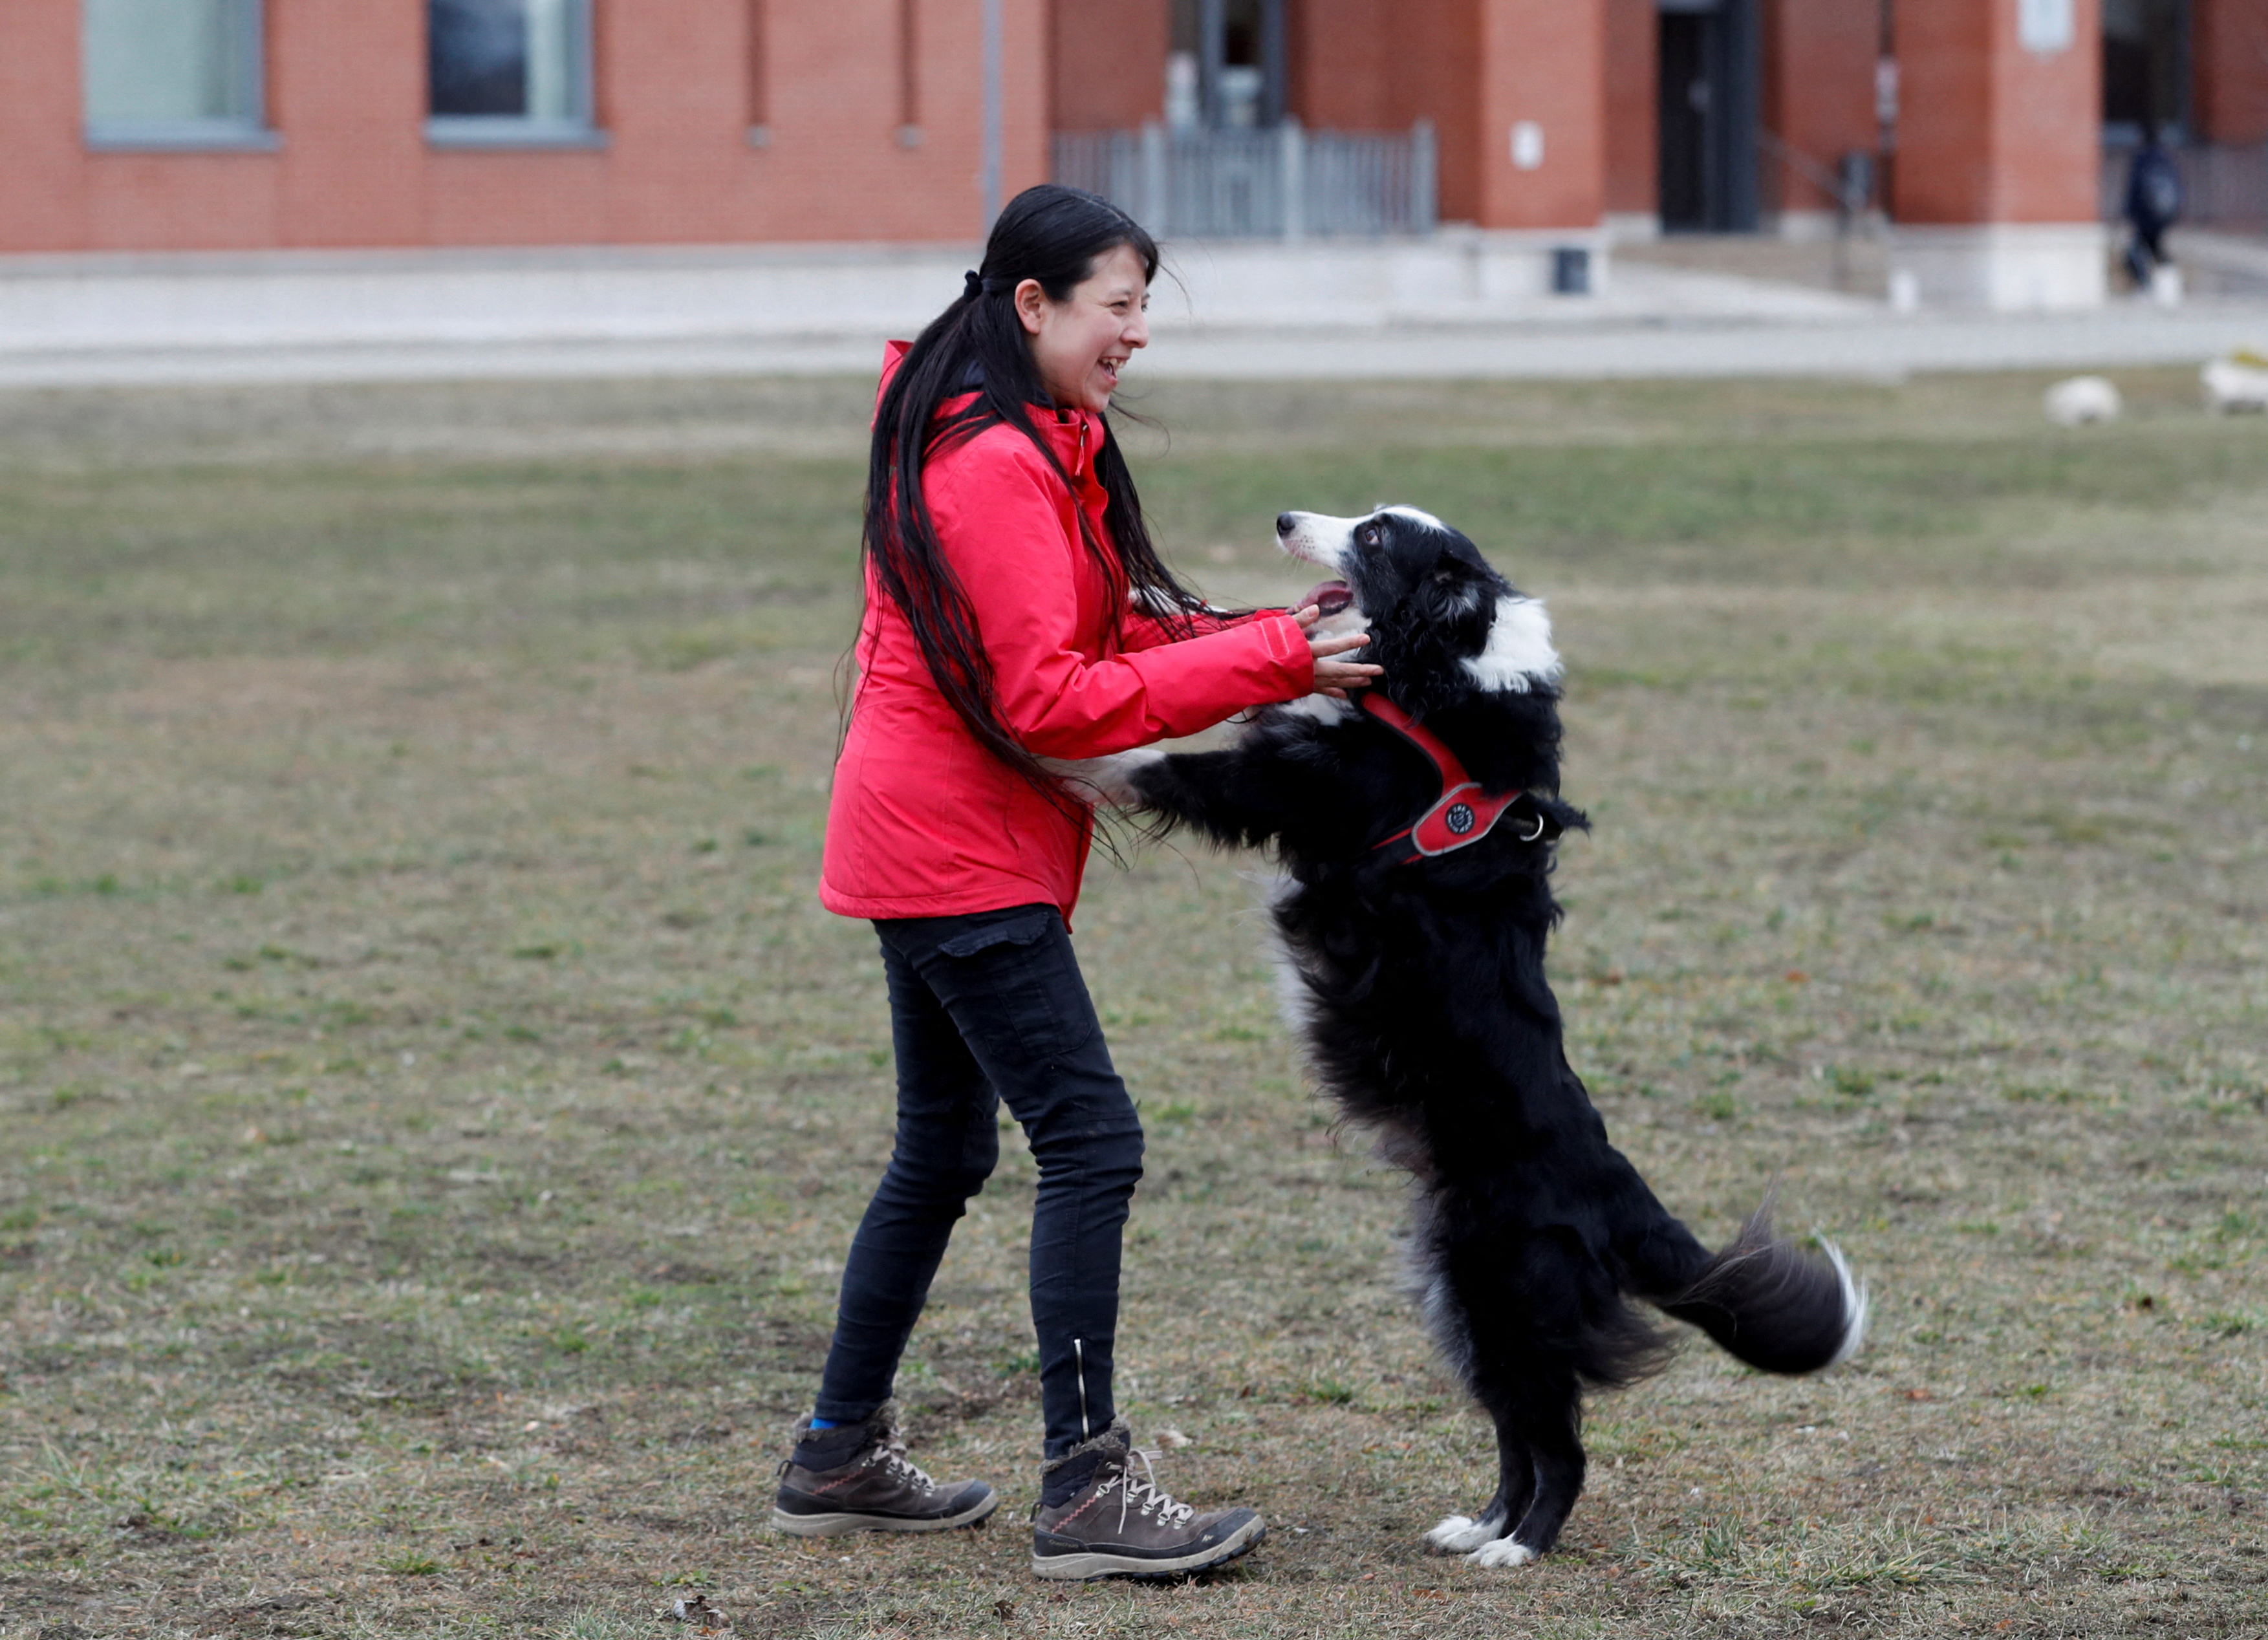 Postdoctoral researcher V. Cuaya plays with her dog Kun-kun at the Ethology Department of the Eotvos Lorand University in Budapest